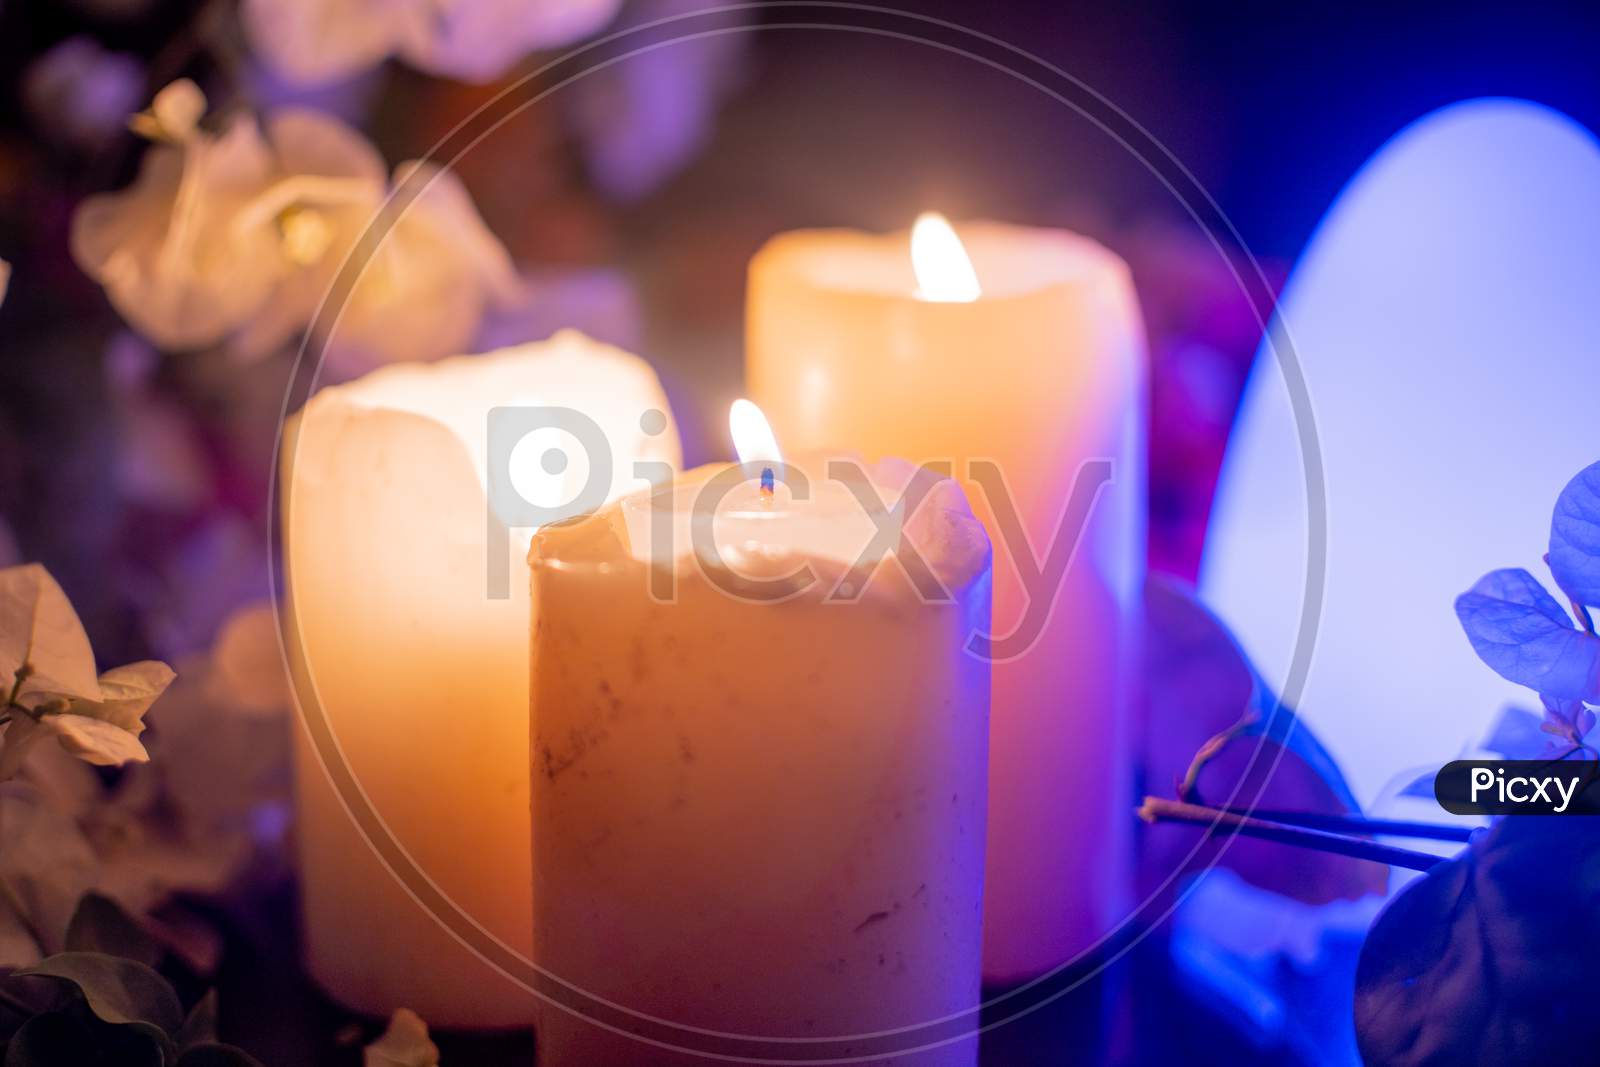 Zoomed In Shot Of Large Thick Wax Candles With Flames Lit And Colorful Flowers All Round And Led Lights Flickering Showing The Table Decorations At A Valentine , Wedding , Engagement Dinner At Night With An Intimate Beautiful Display